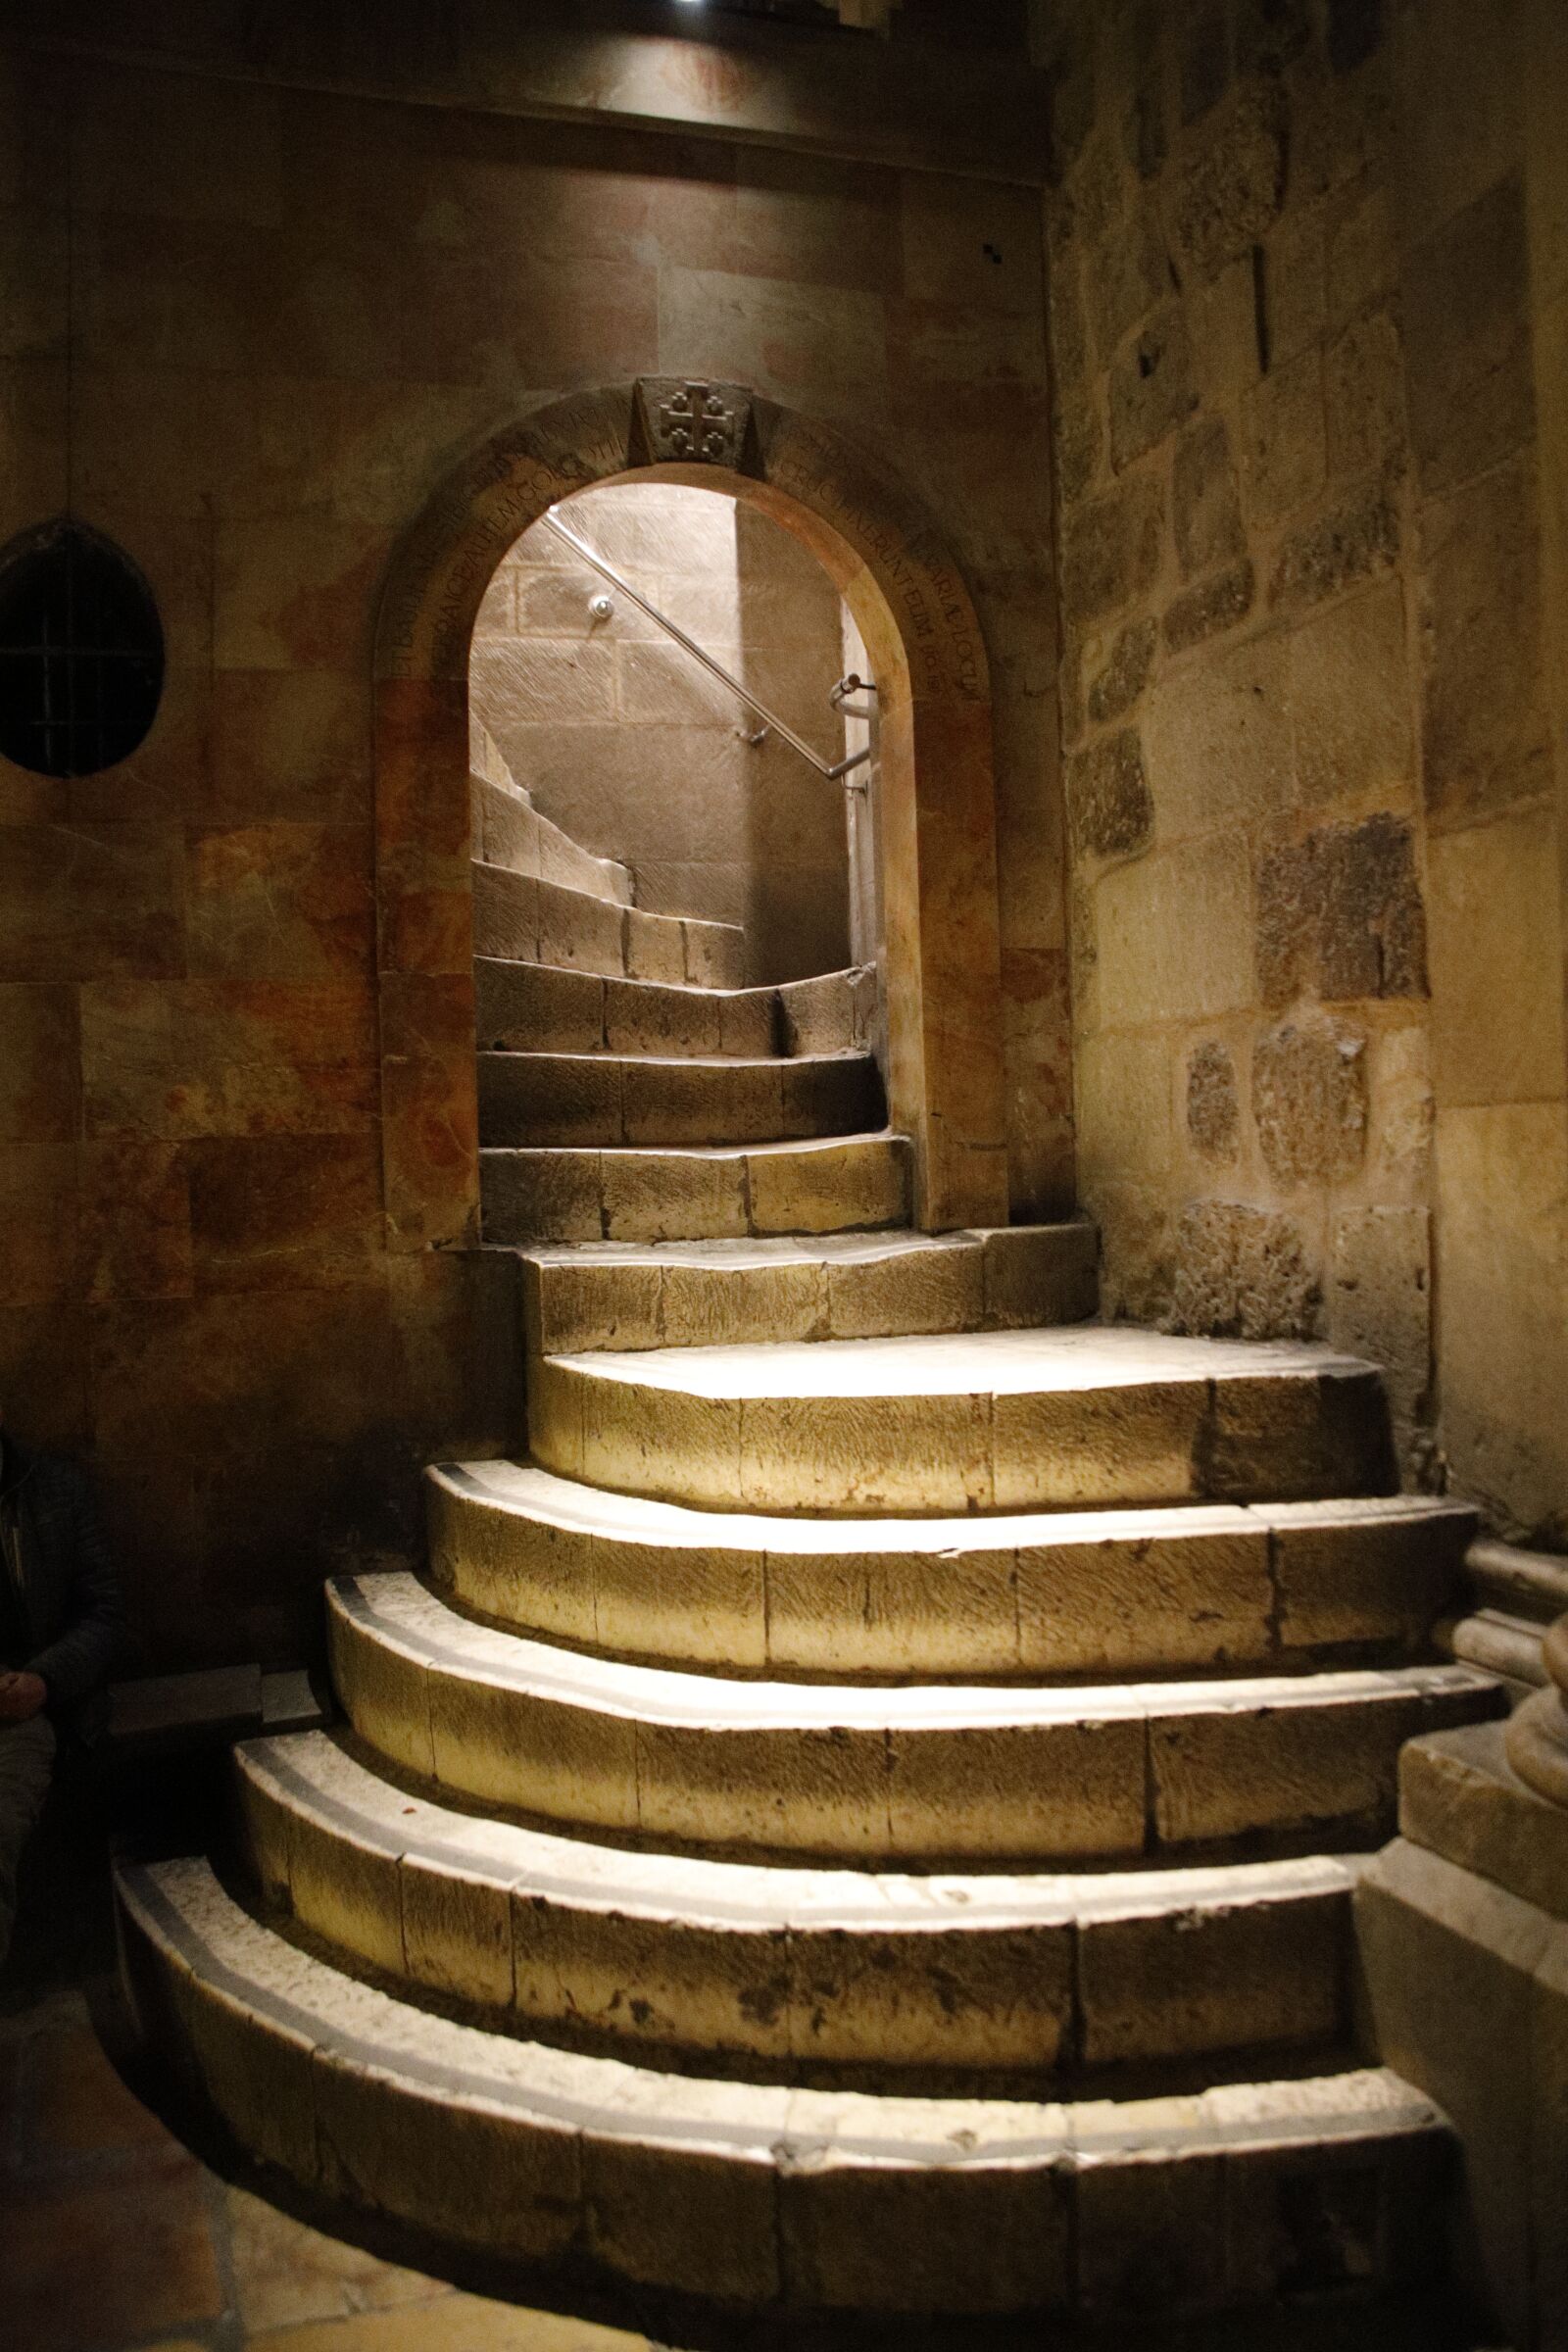 Tamron 28-300mm F3.5-6.3 Di VC PZD sample photo. Stairs, golgotha, basilica of photography